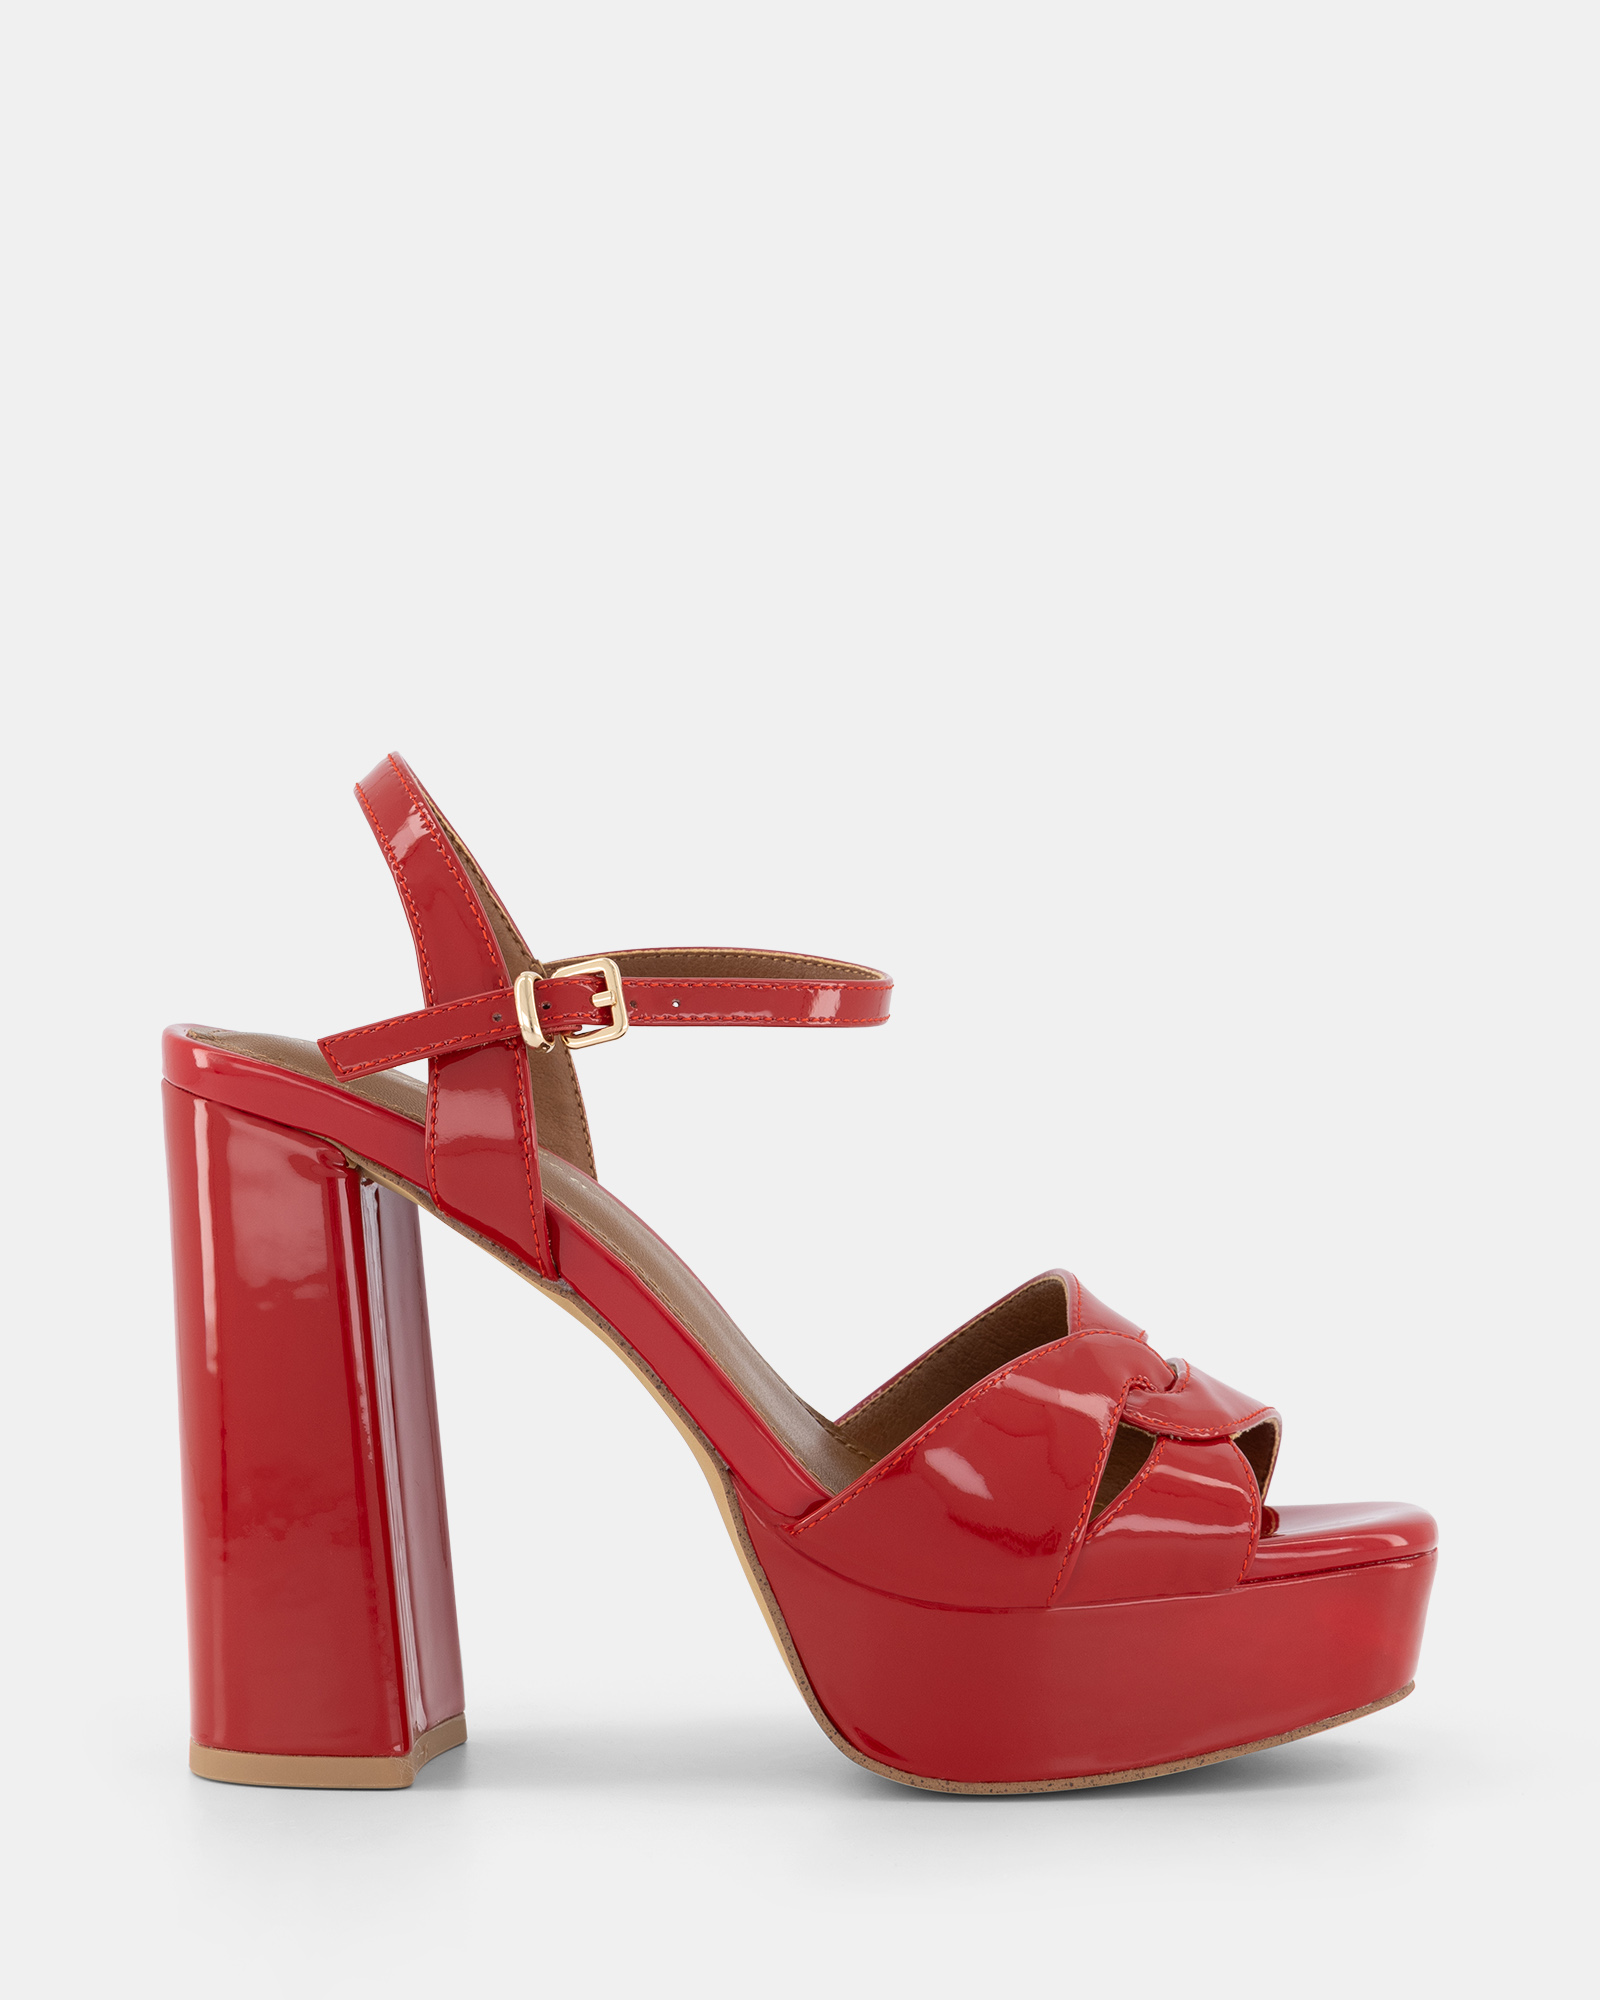 SHELLY SHEN Mack Heels - Red Patent | Shoe Connection AU